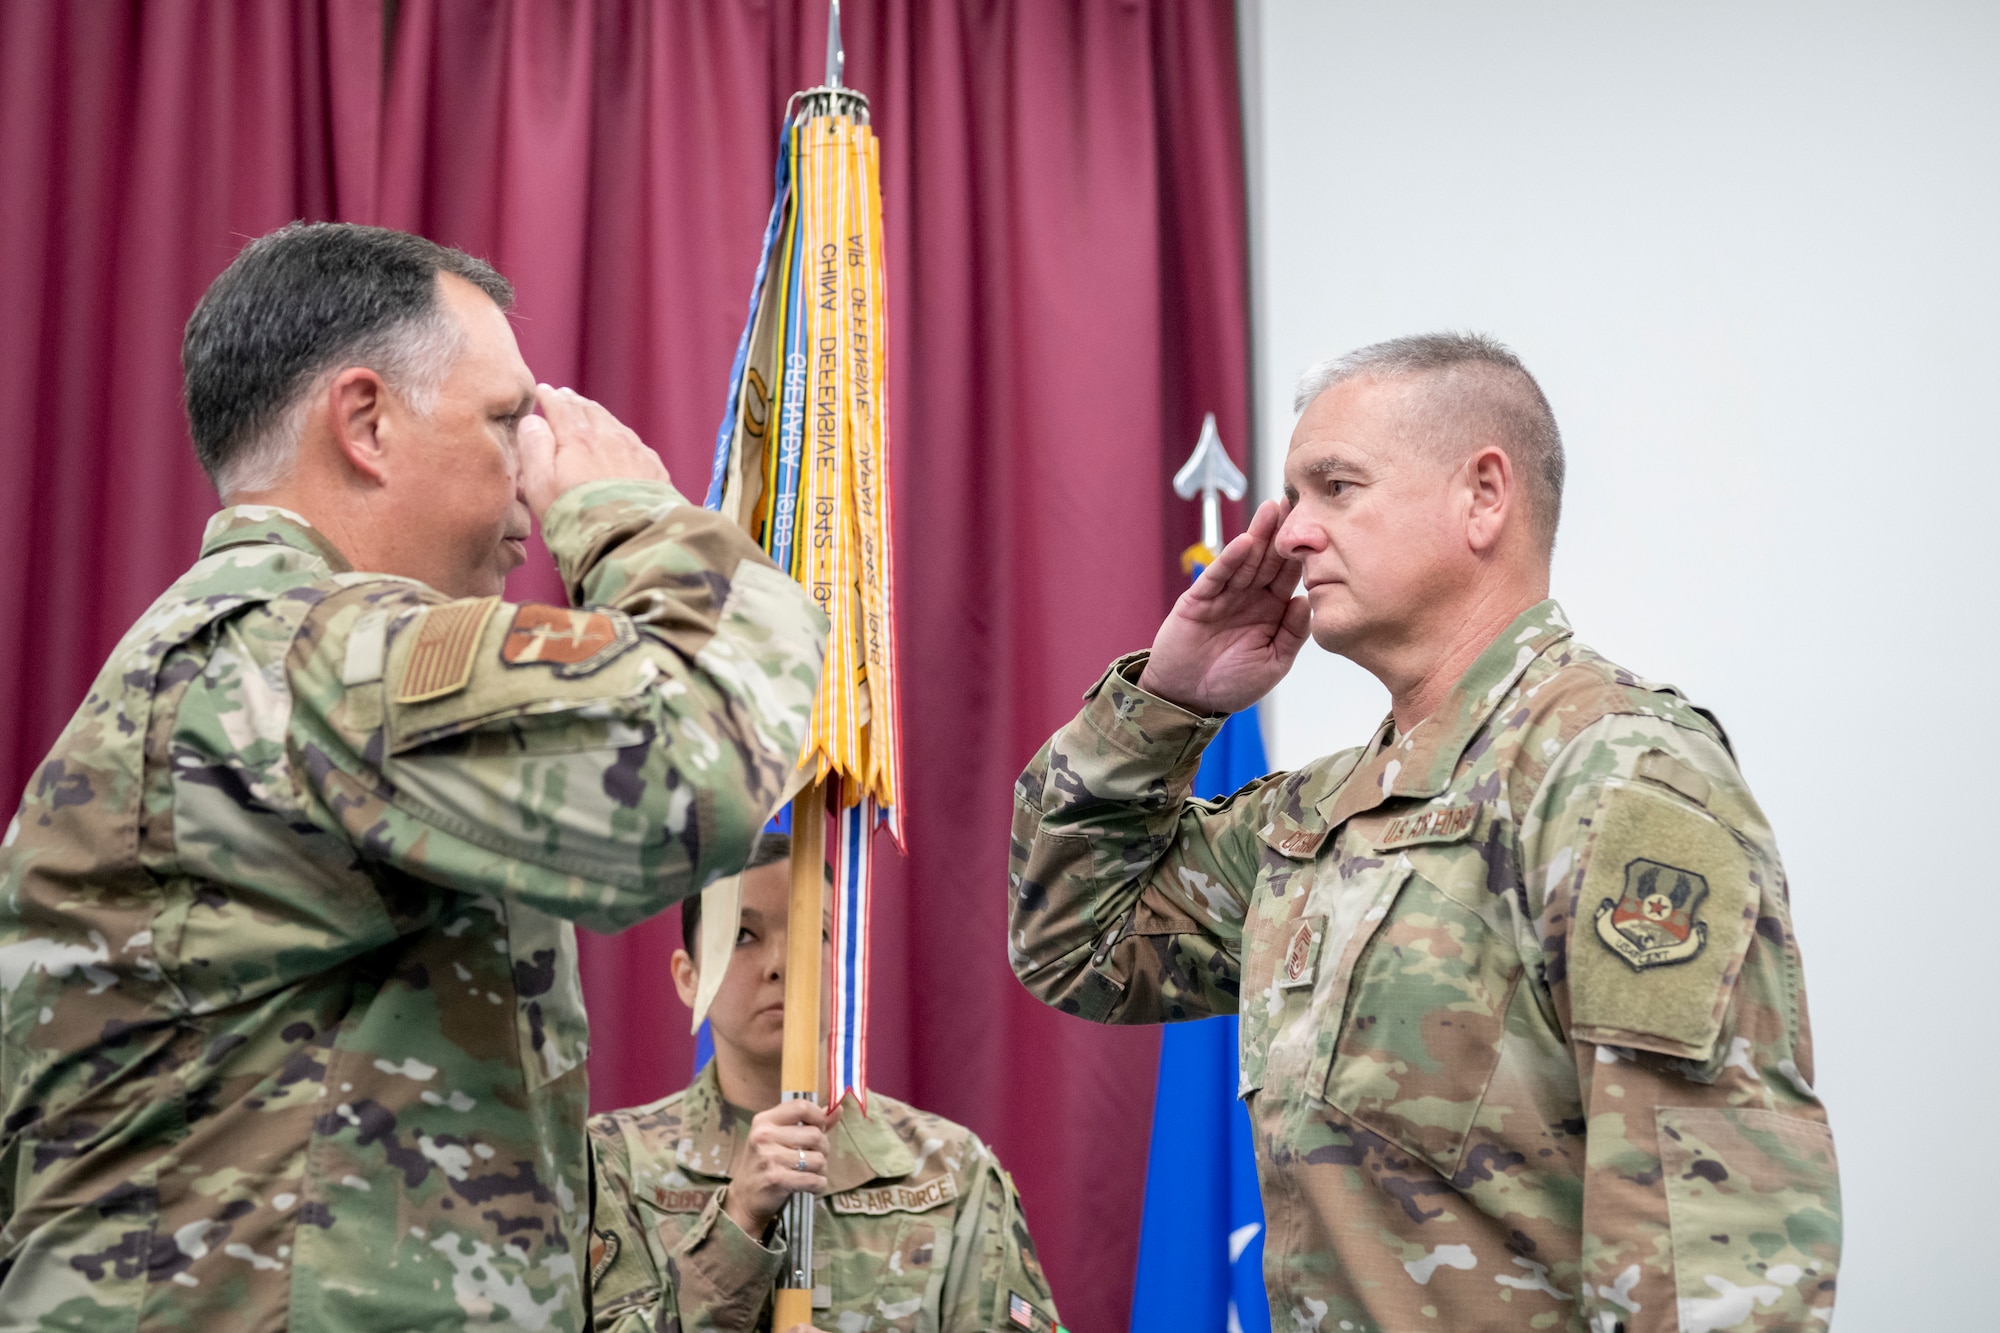 U.S. Air Force Chief Master Sgt. J. Stacy Cutshaw, assigned to the 380th Air Expeditionary Wing, salutes Col. Ronald Selvidge, 380th AEW commander, before assuming responsibility as the new command chief, during a combined change of command and change of responsibility ceremony at an undisclosed location, April 1, 2024.